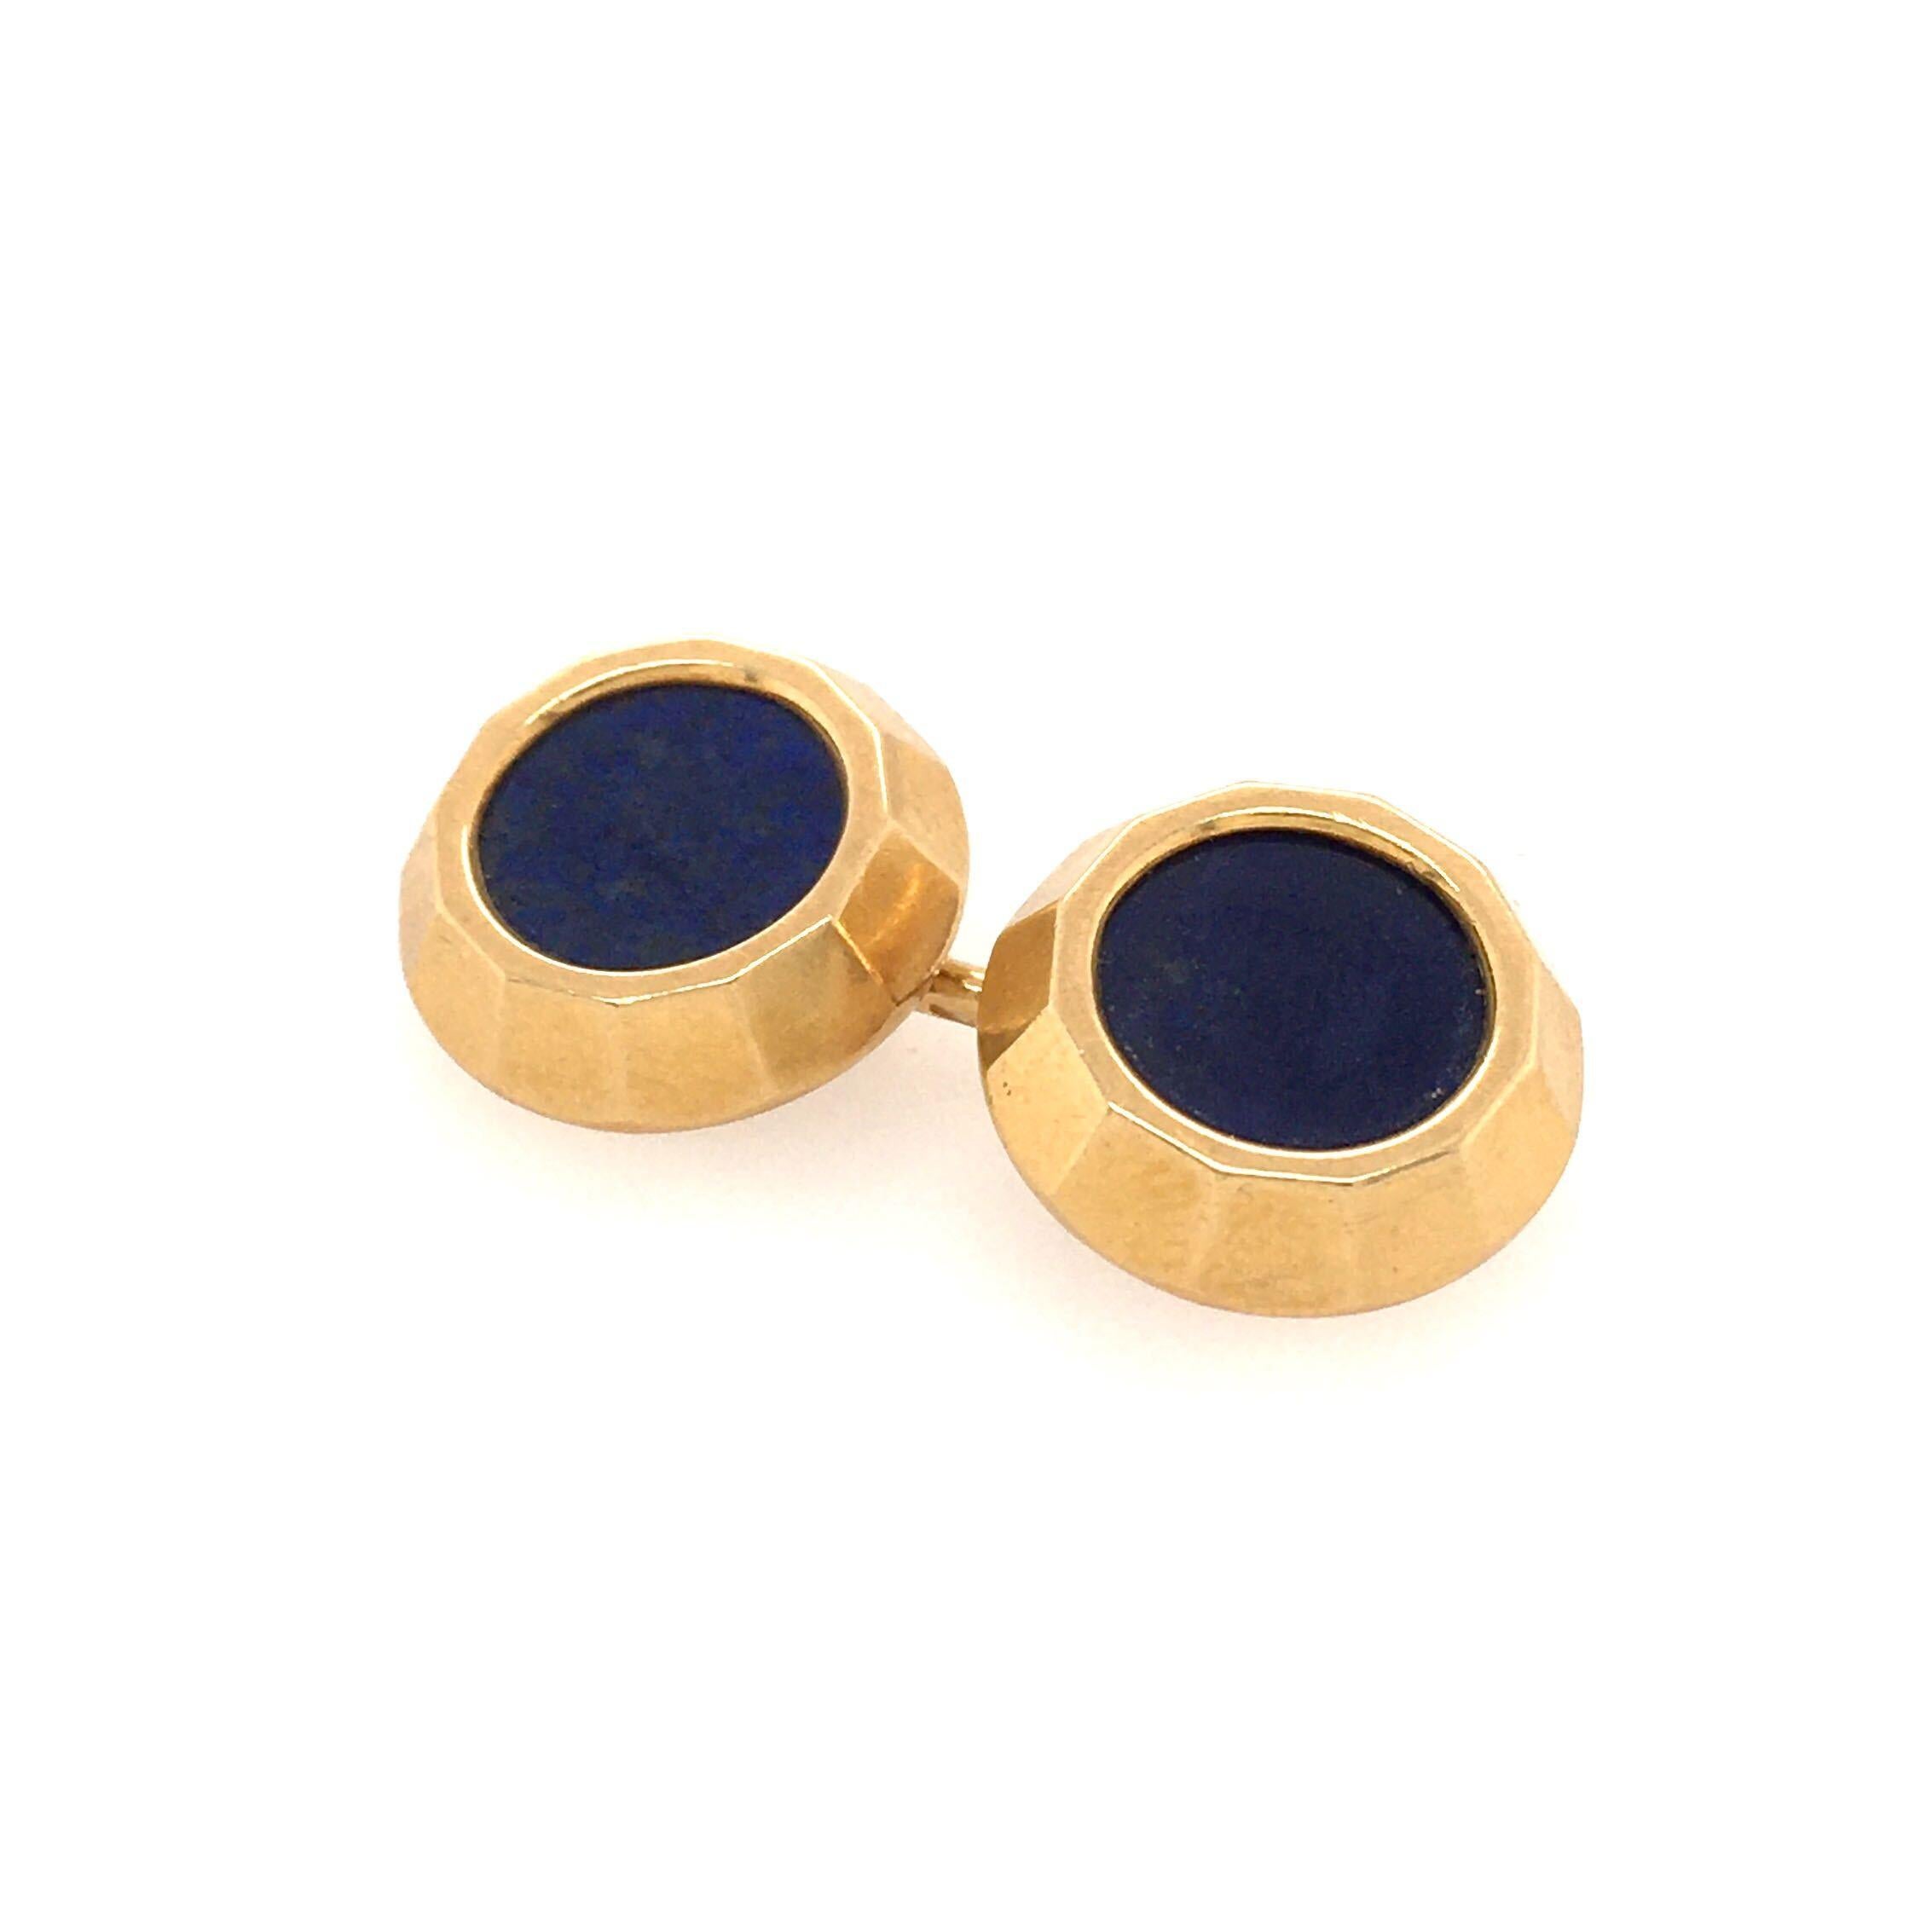 A pair of 18 karat yellow gold and lapis lazuli cufflinks, French. Circa 1960. Each double link designed as a circular lapis lazuli disc, within a faceted gold bezel. Diameter is approximately 1/2 inch, gross weight is approximately 12.9 grams. With